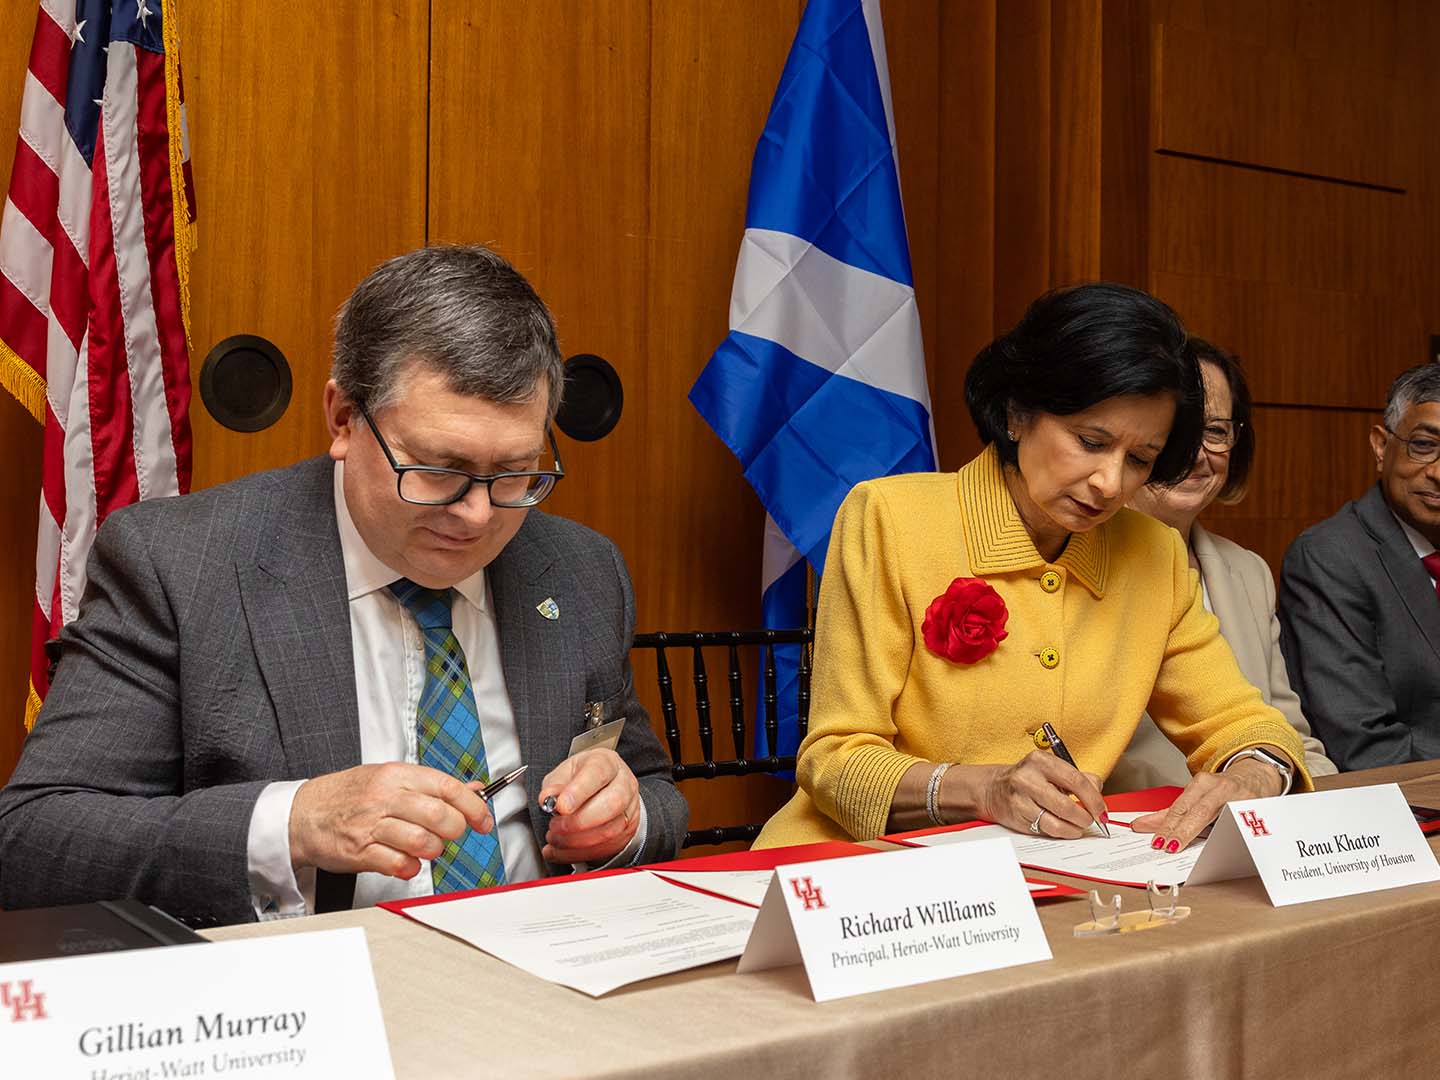 University of Houston President Renu Khator, in a yellow suit with red rose, and Heriot-Watt University's Principal Richard Williams, with glasses in a grey suit, signing agreement.